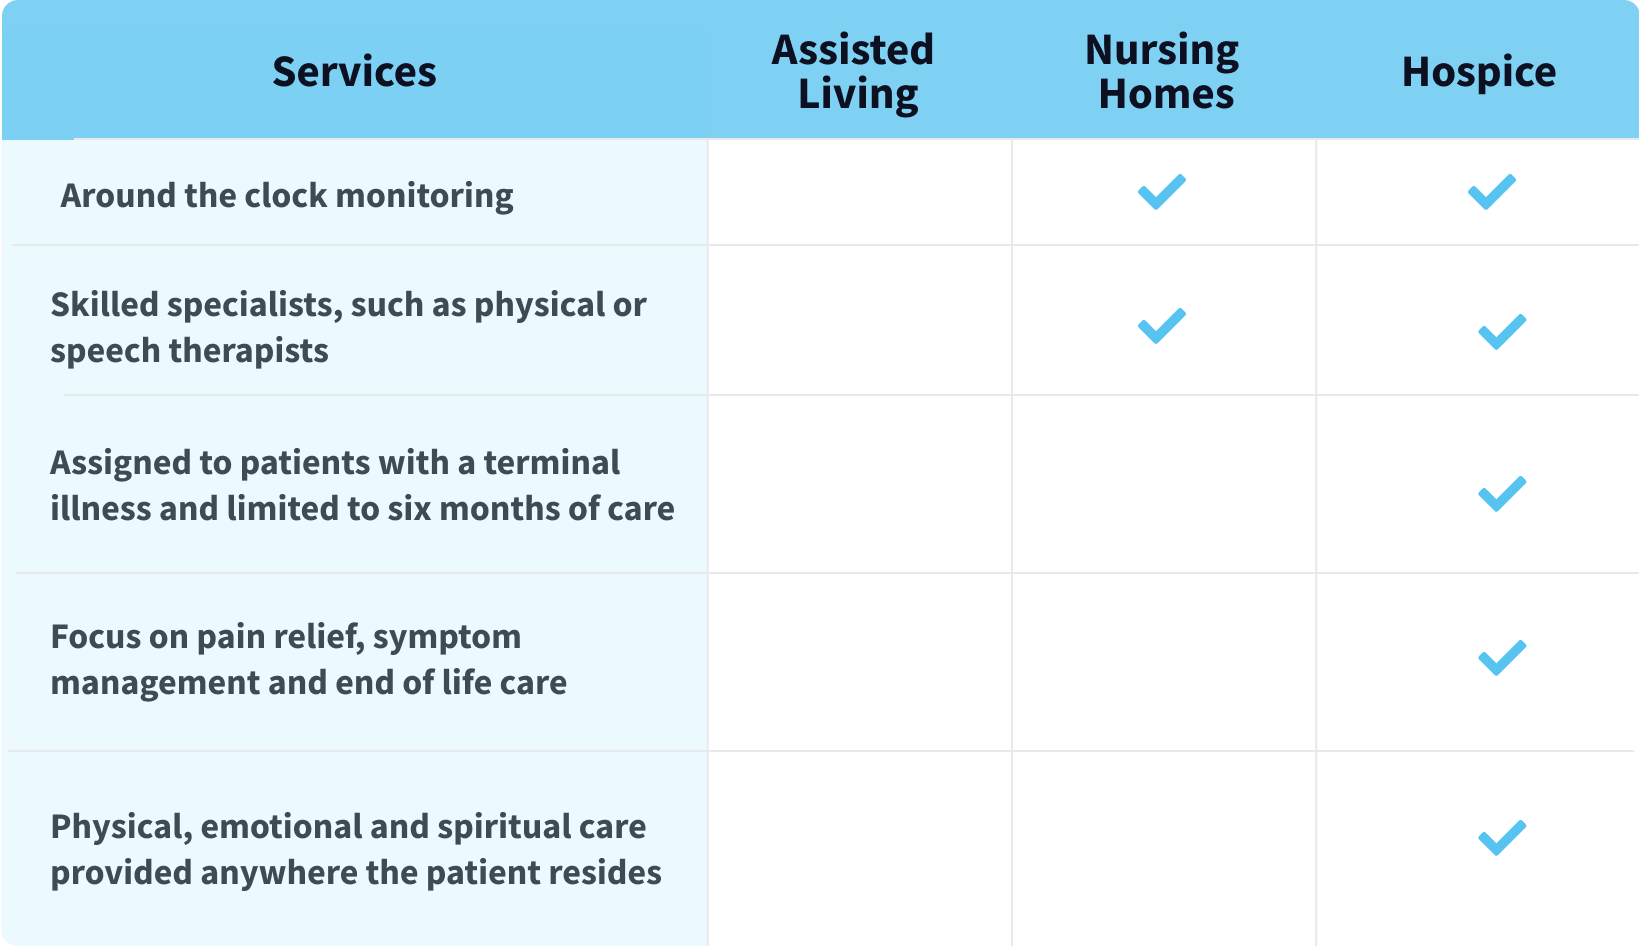 Table of services offered by assisted living facilities, nursing homes and hospice. Around-the-clock monitoring is offered at nursing homes and hospices. Skilled specialists, such as physical or speech therapists, are offered at nursing homes and hospices. Hospice services are exclusively assigned to patients with a terminal illness and are limited to six months of care. Hospice also focuses on pain relief, symptom management and end-of-life care, offering physical, emotional and spiritual care anywhere the patient resides.